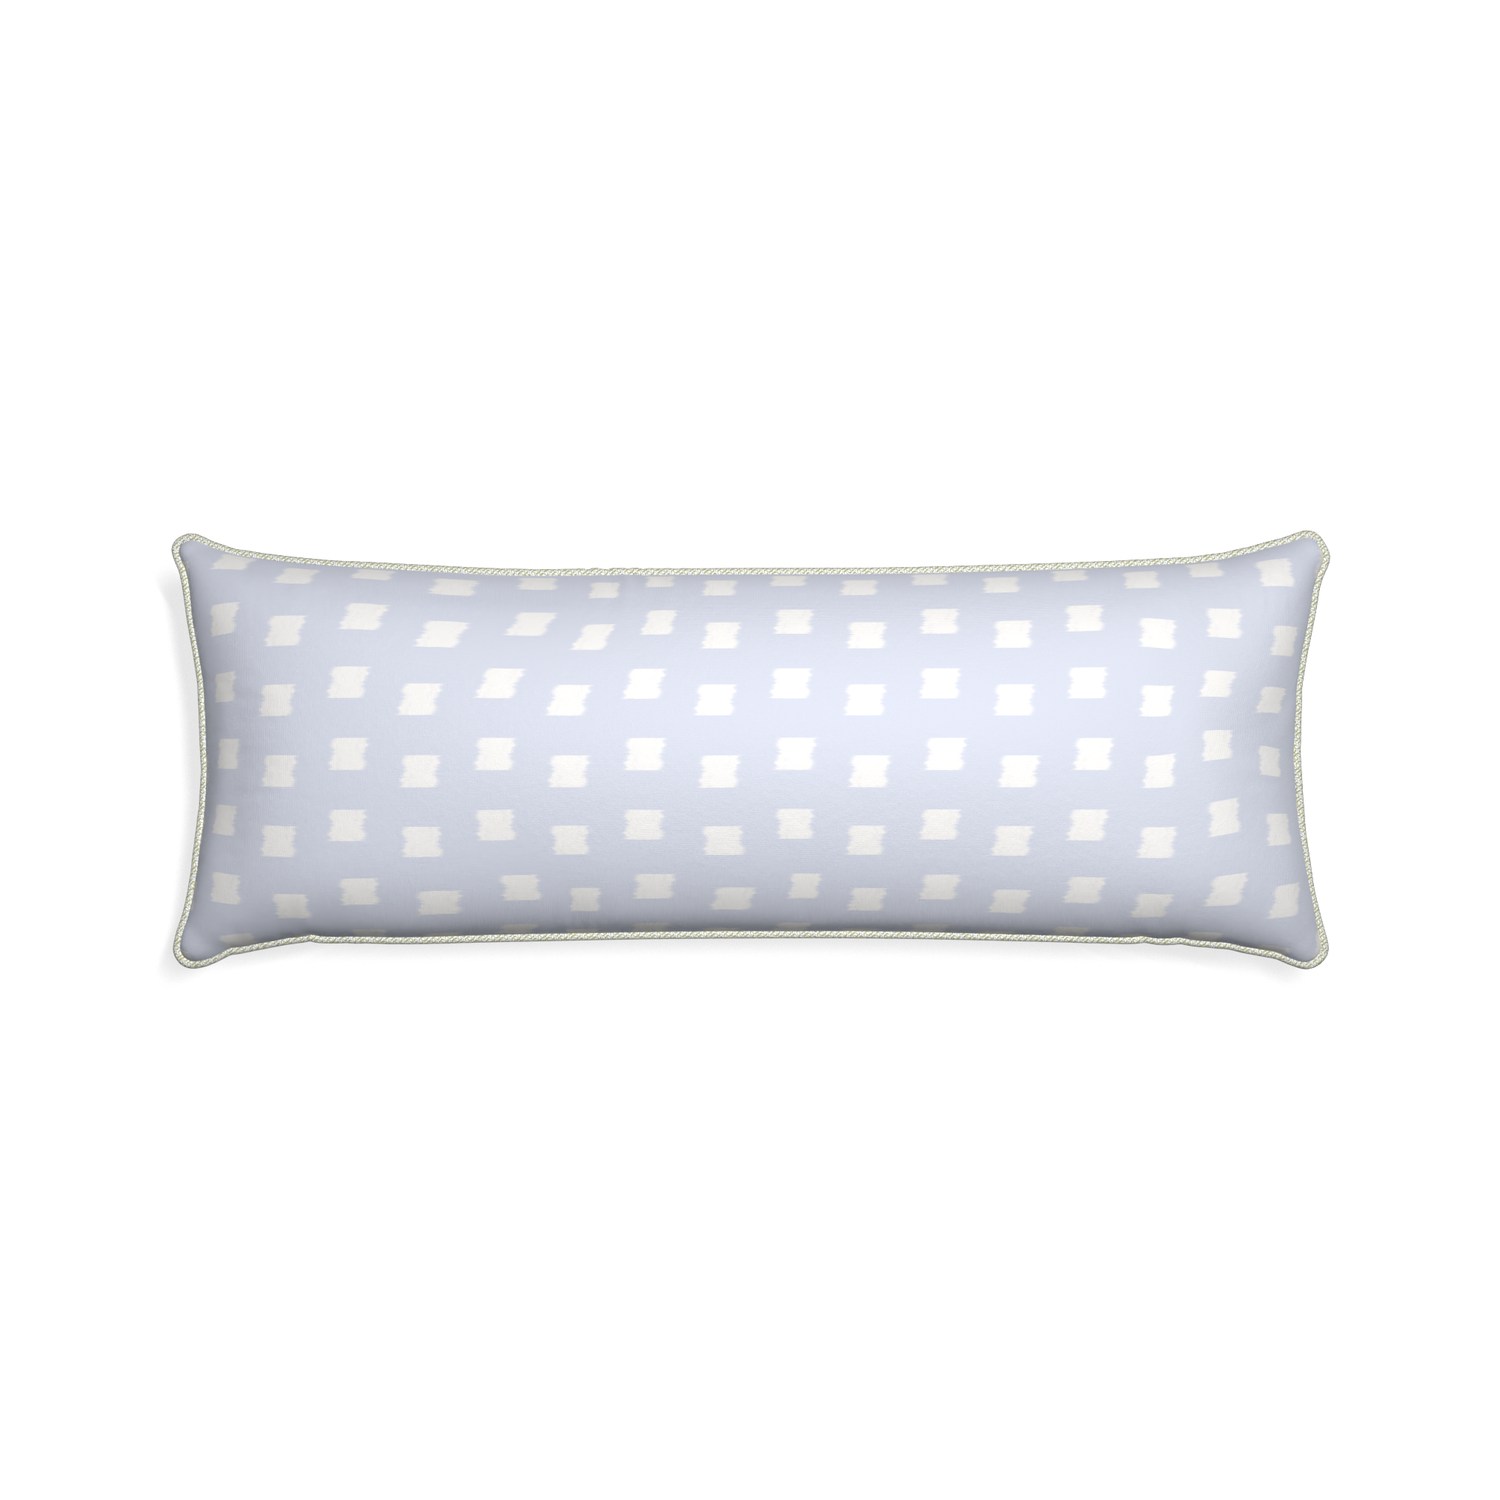 Xl-lumbar denton custom pillow with l piping on white background